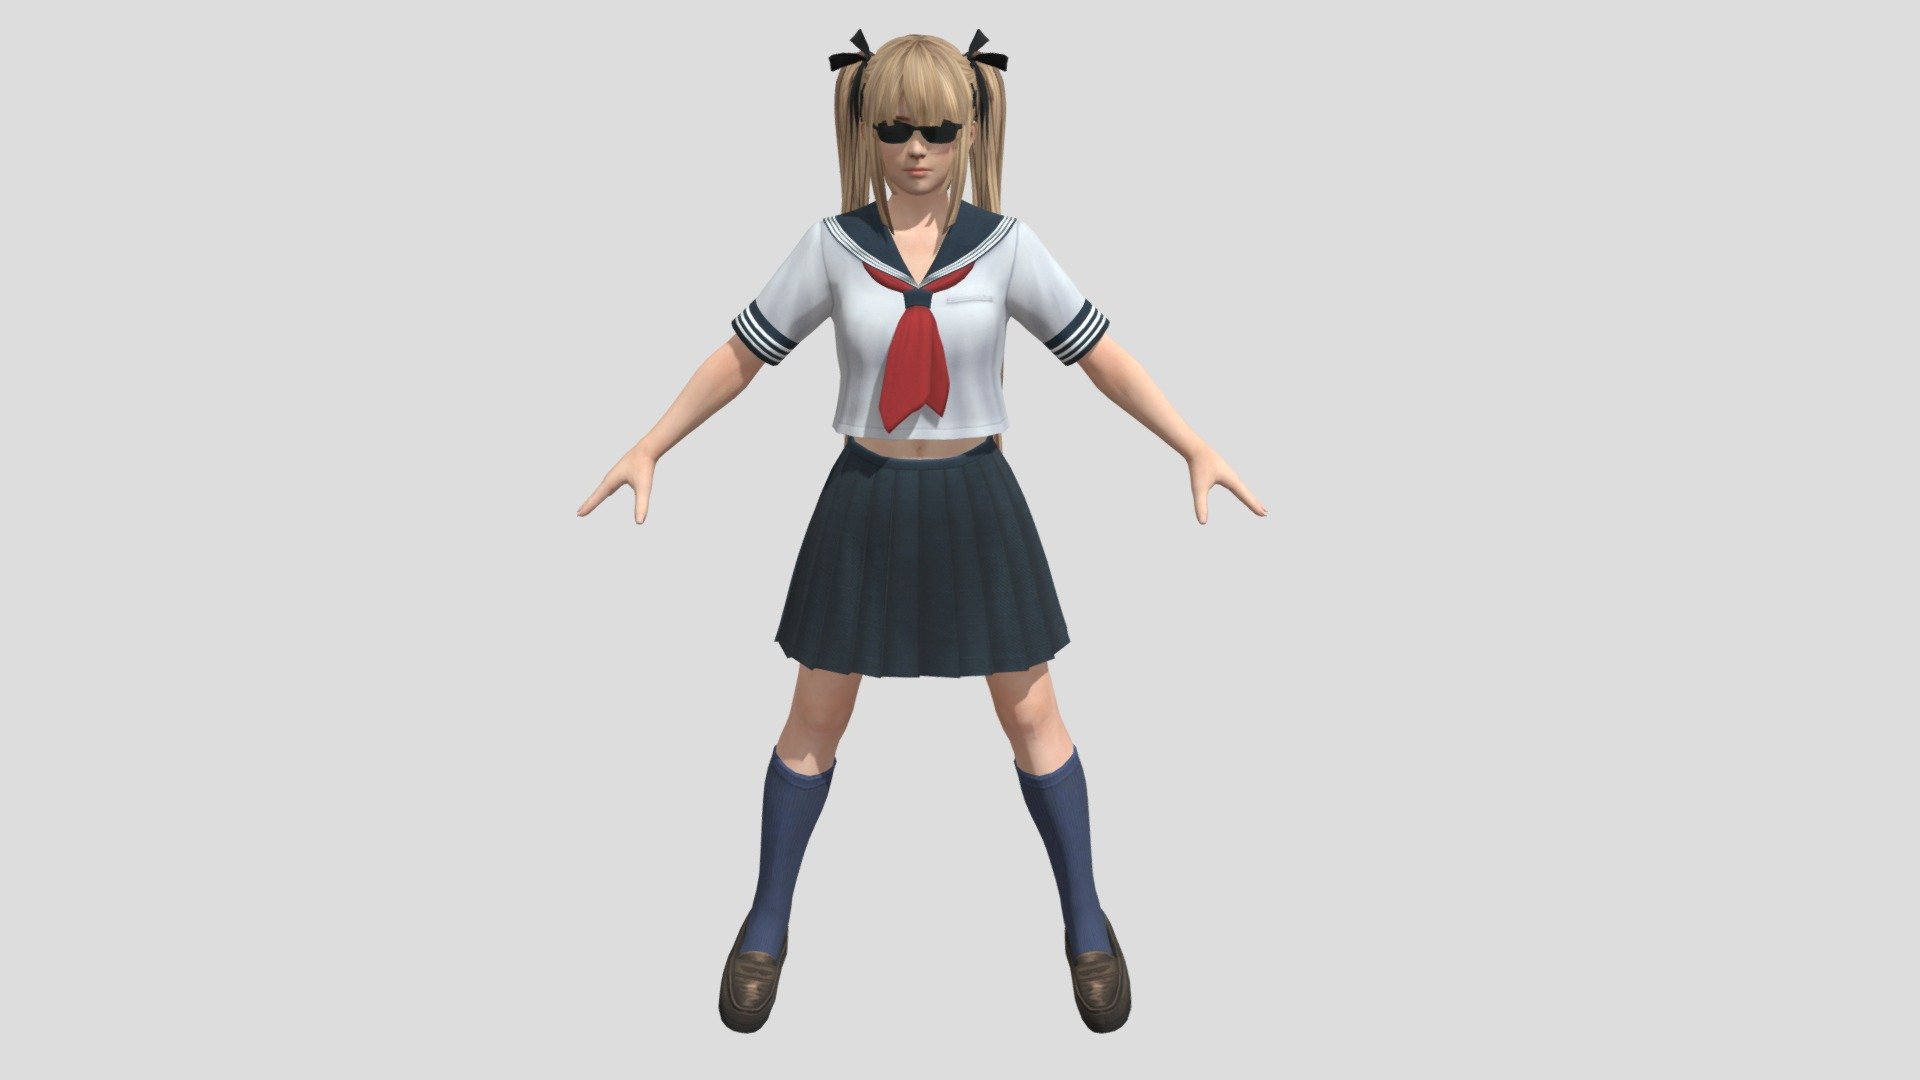 Anime: Marie Rose 3D Model free download for Unity and Unreal Engine!!!!!!!!!!!!!!!!!!

MY CODE CREATOR IN FORTNITE: TEAMEW

FIND ME ON YOUTUBE: E.W. amazing games

OTHER SUITS: https://www.mediafire.com/file/7t0k0muza6706g6/Anime.zip/file / https://www.mediafire.com/file/n30ijjeo5gg7l15/MarieRose2.zip/file

OTHER ANIME 3D MODEL: https://www.mediafire.com/file/qhd1ck17gjqrtiz/Holi.zip/file - Anime: Marie Rose - Download Free 3D model by EWTube0 3d model